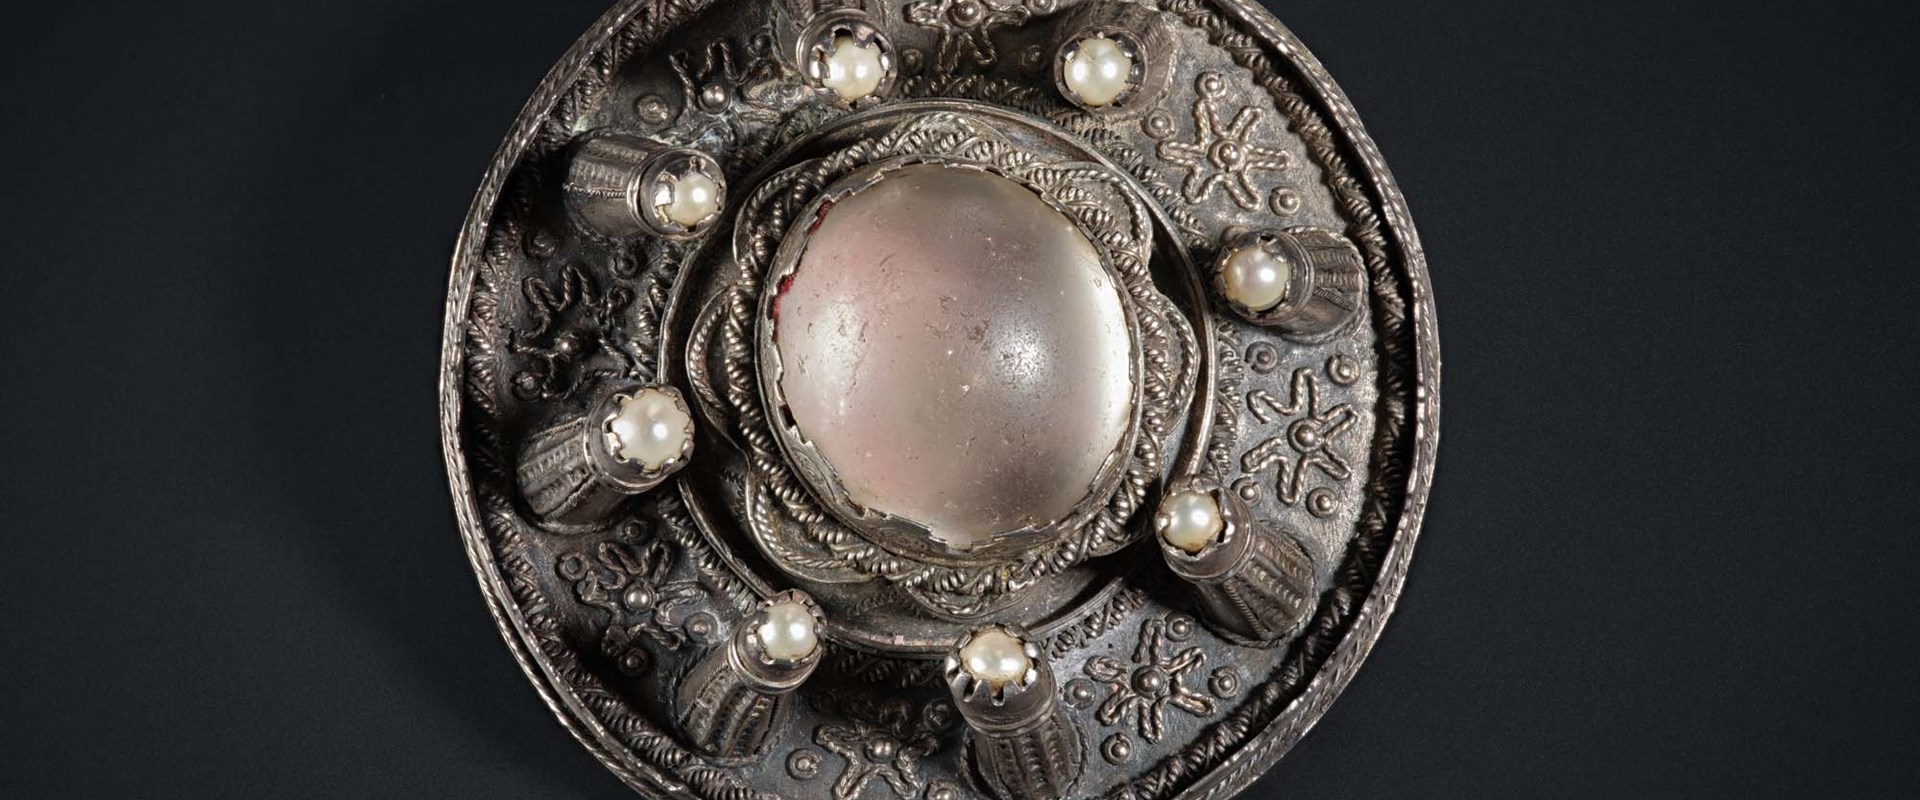 A circular metal brooch with raised decorative elements.